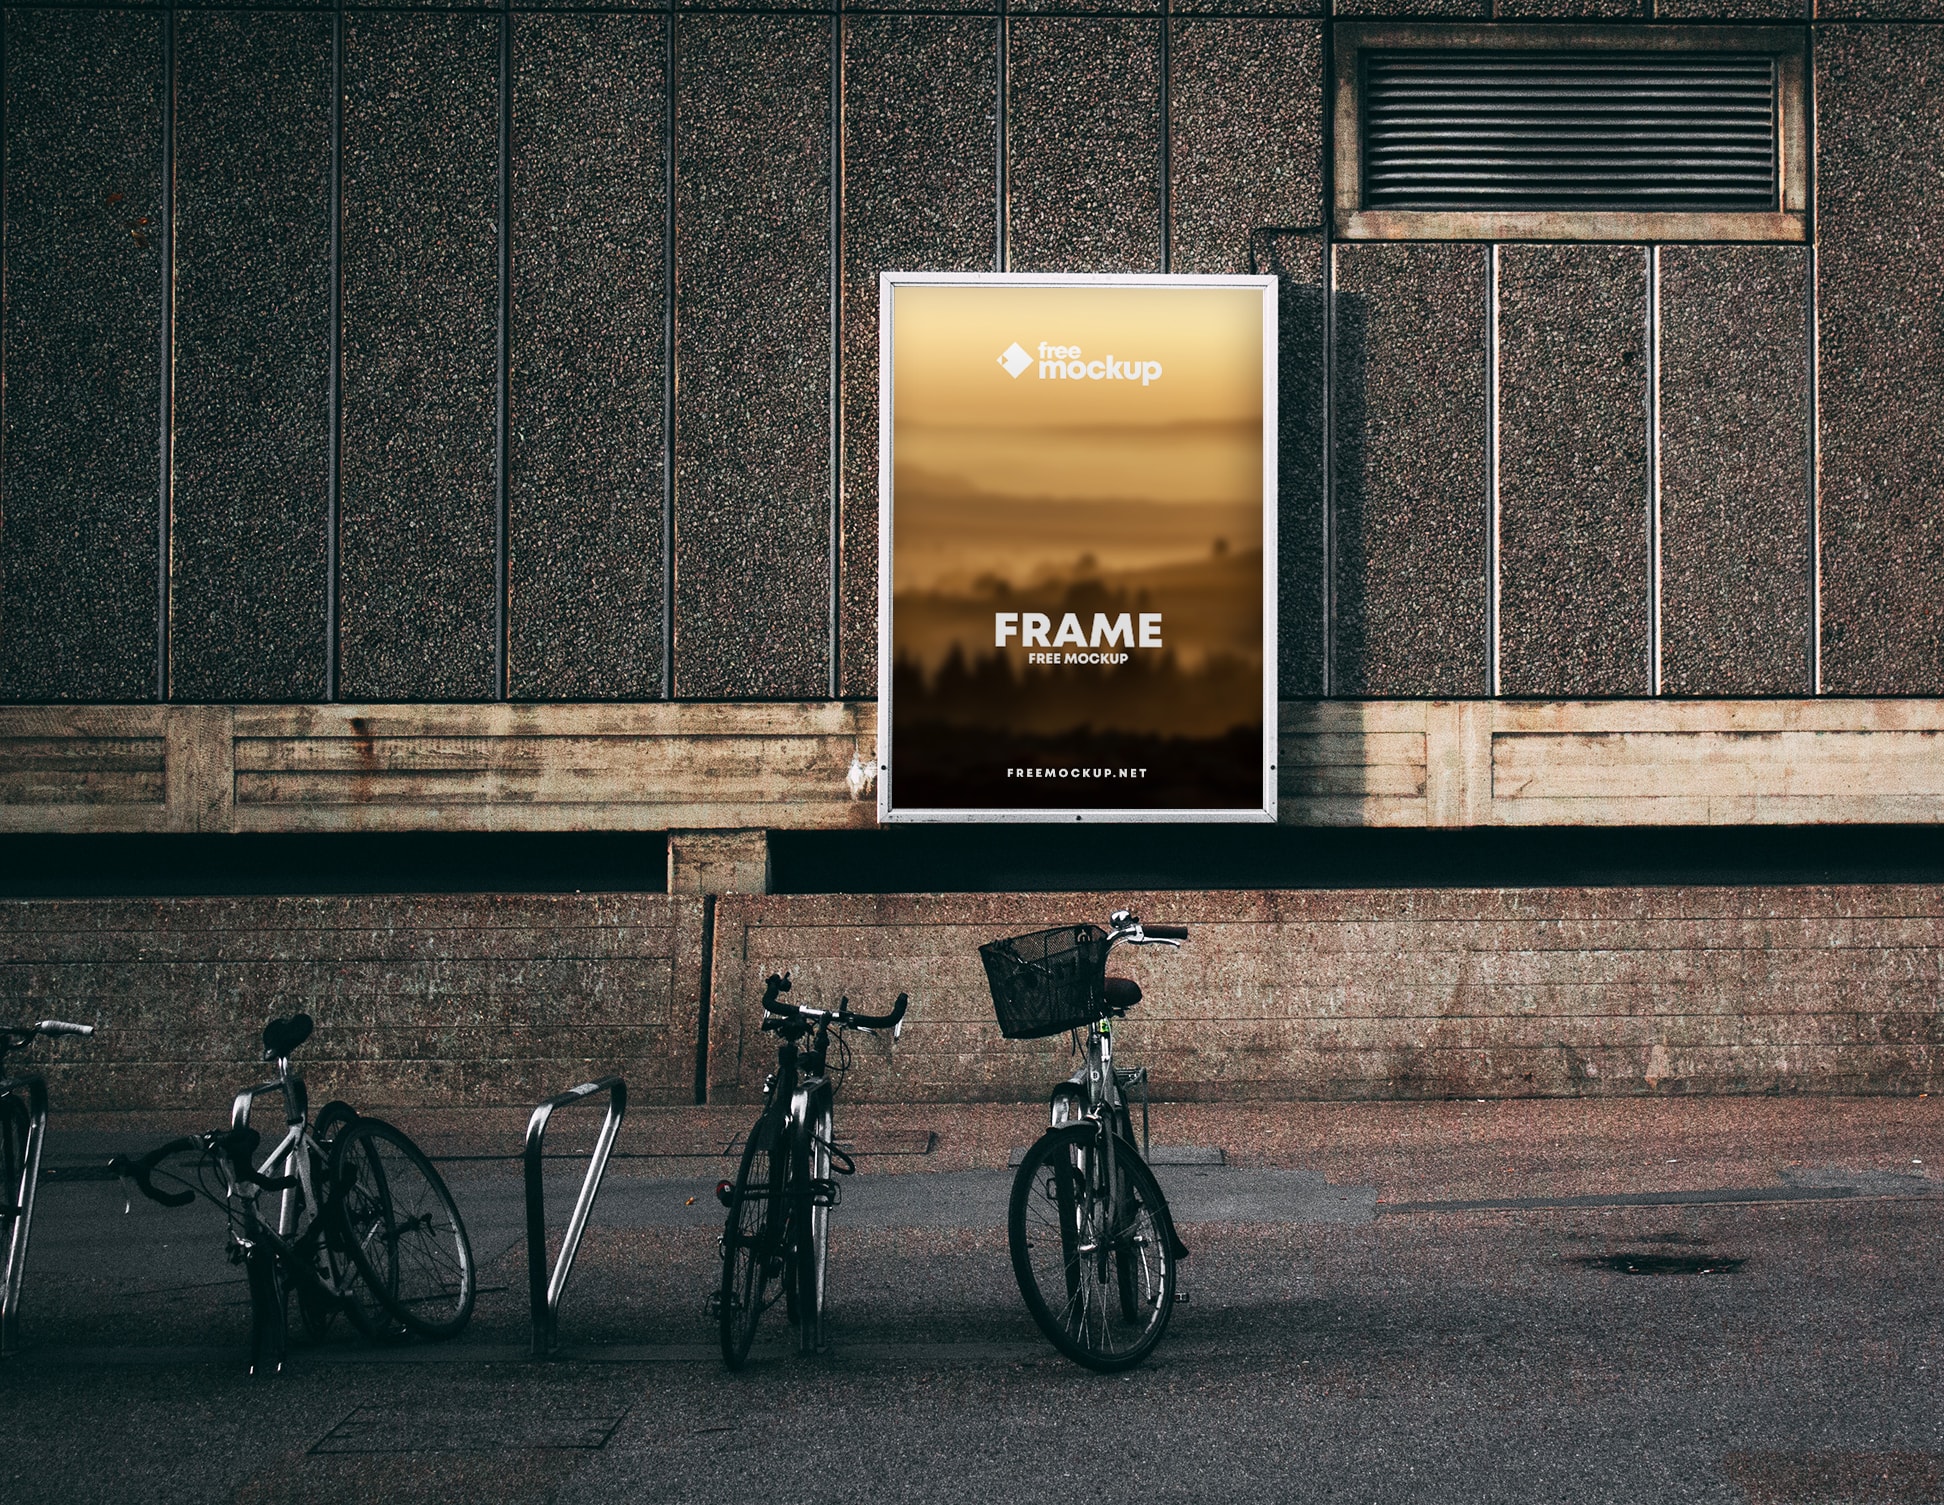 Download Poster Frame In Street With Bikes Free Mockup Freemockup PSD Mockup Templates